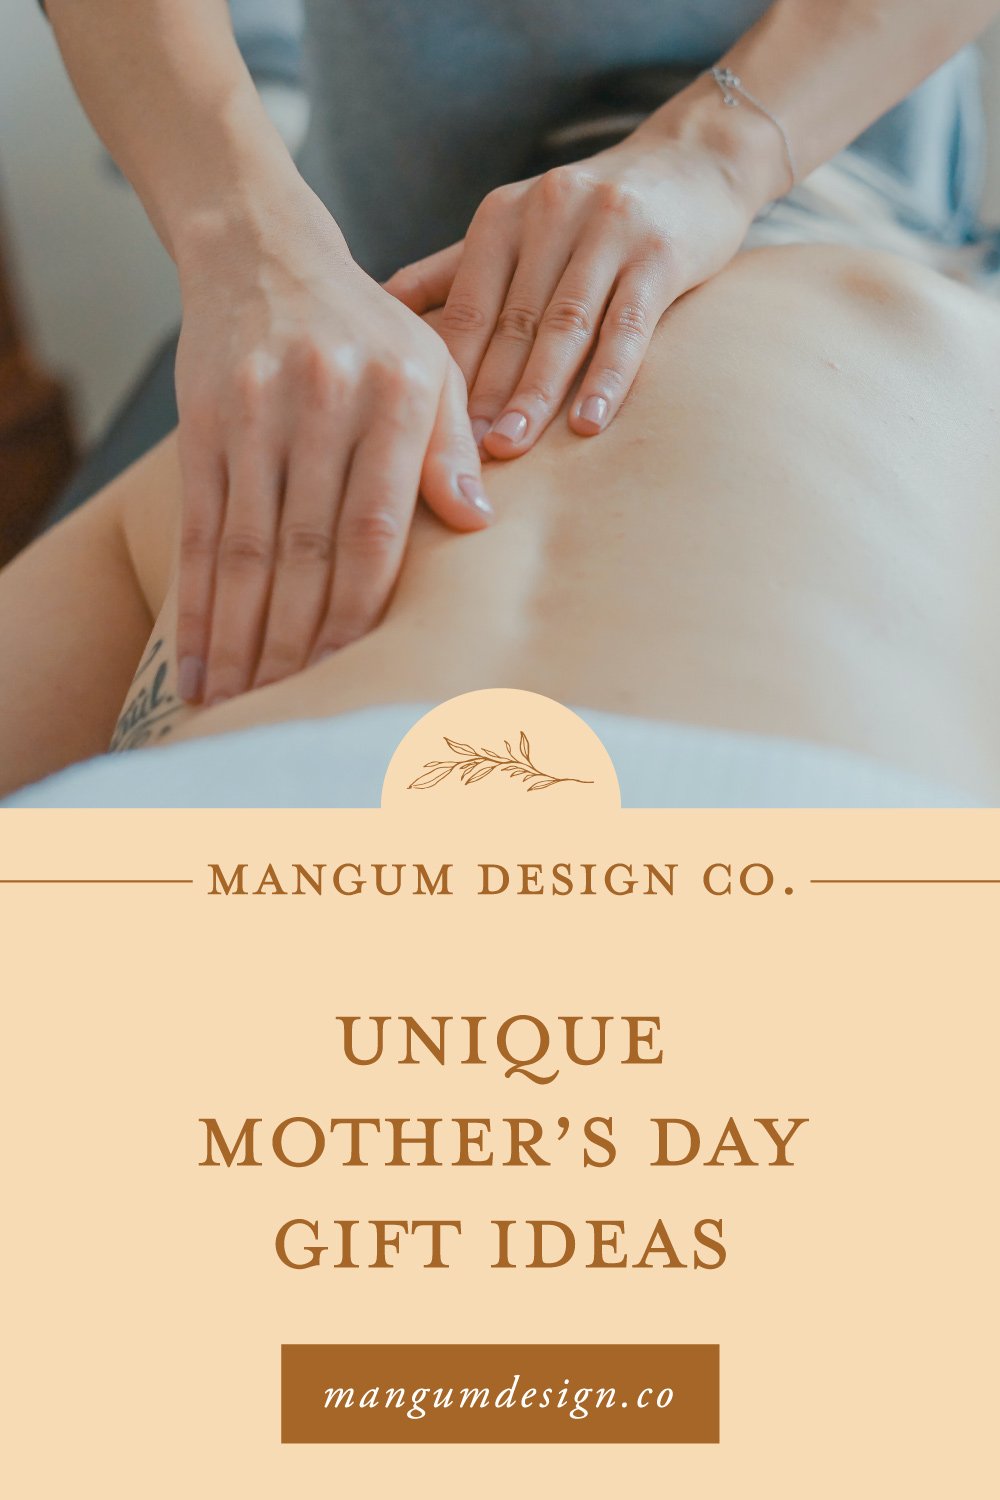  Check out this Mother’s Day Gift Guide if you need gift ideas for Mother’s Day. #mangumdesignco #mothersdaygiftguide #mothersday #giftidea #sentimentalgifts #customgiftideas #customillustrations #personalizedjewelry 